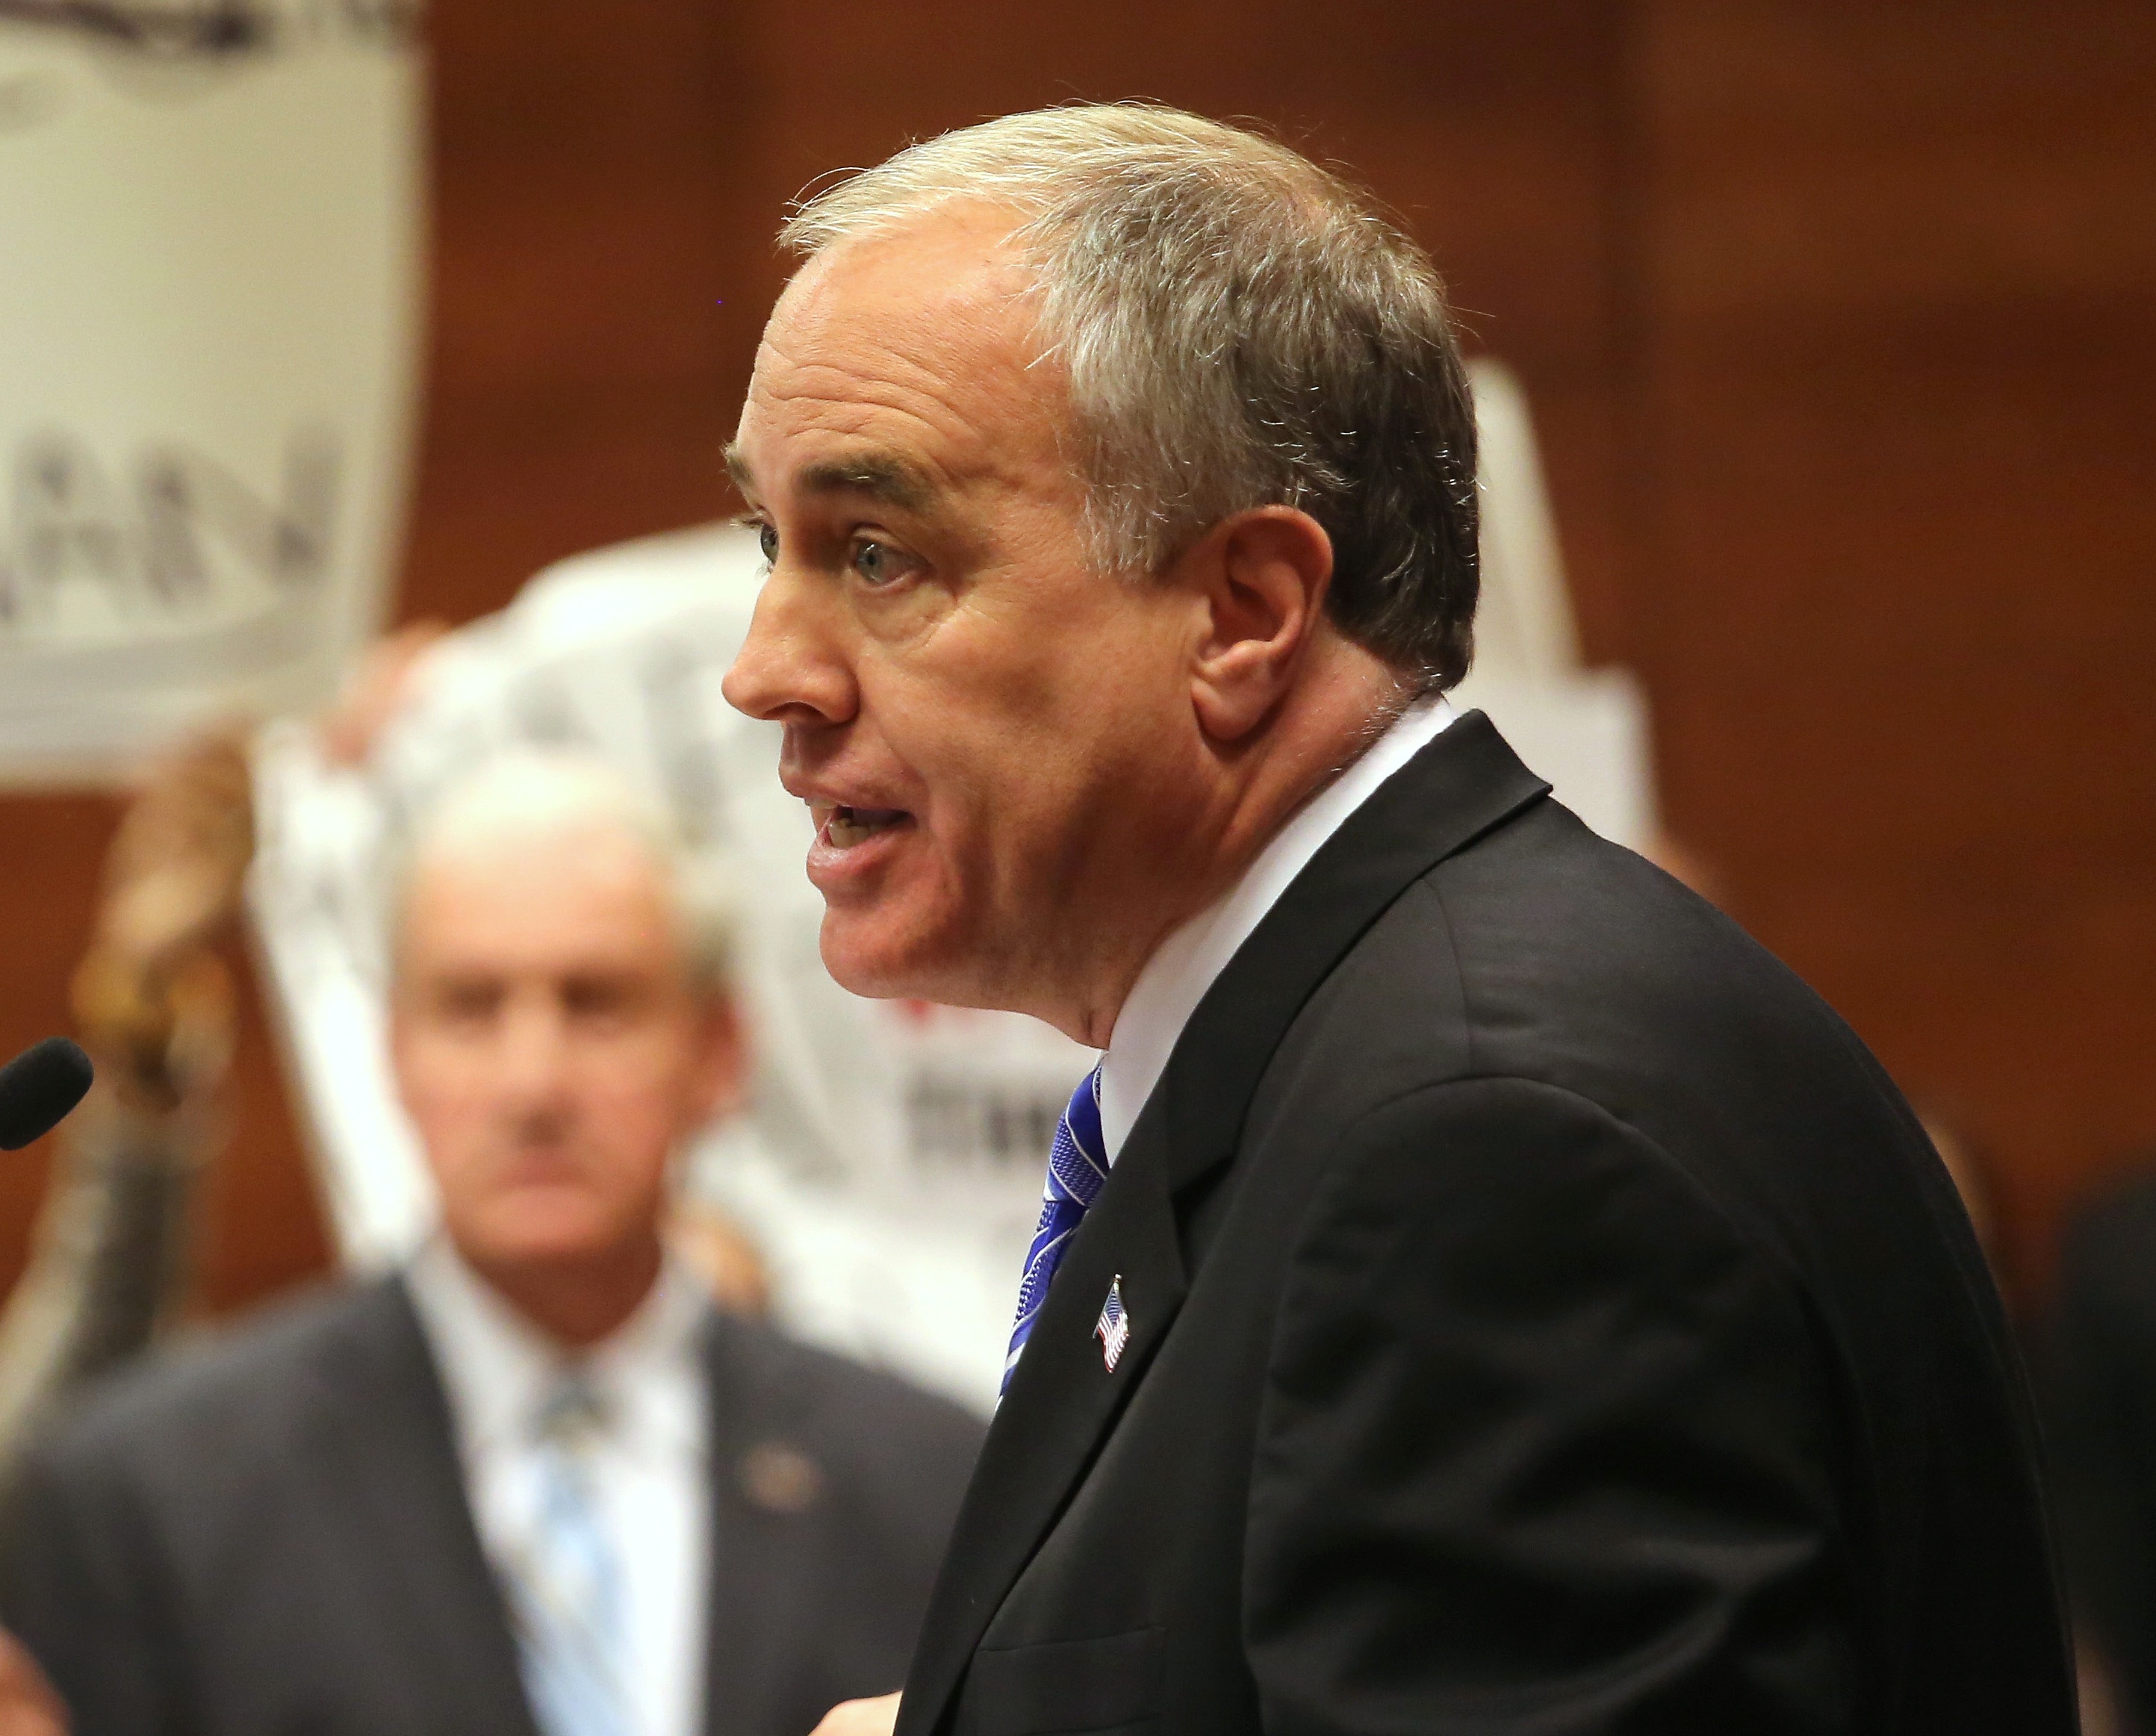 State Comptroller Thomas DiNapoli. (Photo by John Moore/Getty Images)